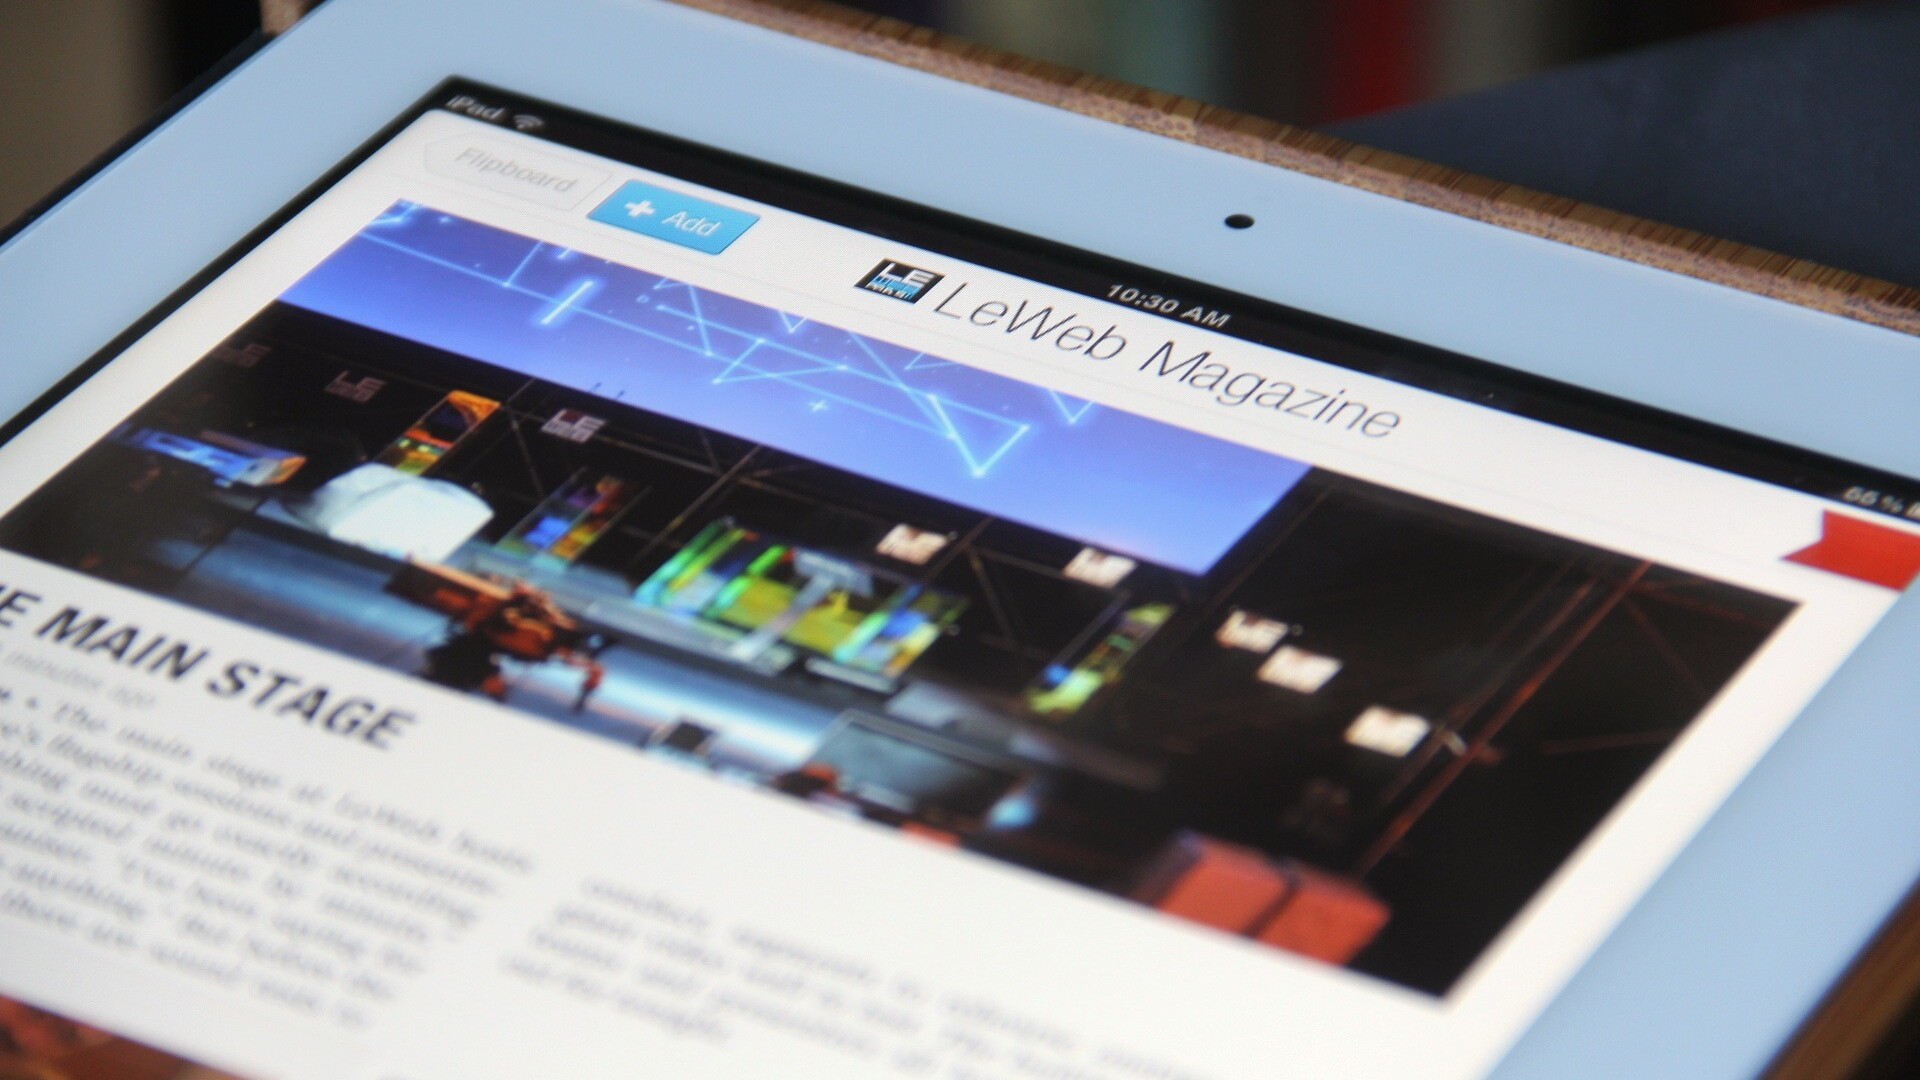 Experience LeWeb with the first ever conference magazine for Flipboard, from Fotopedia